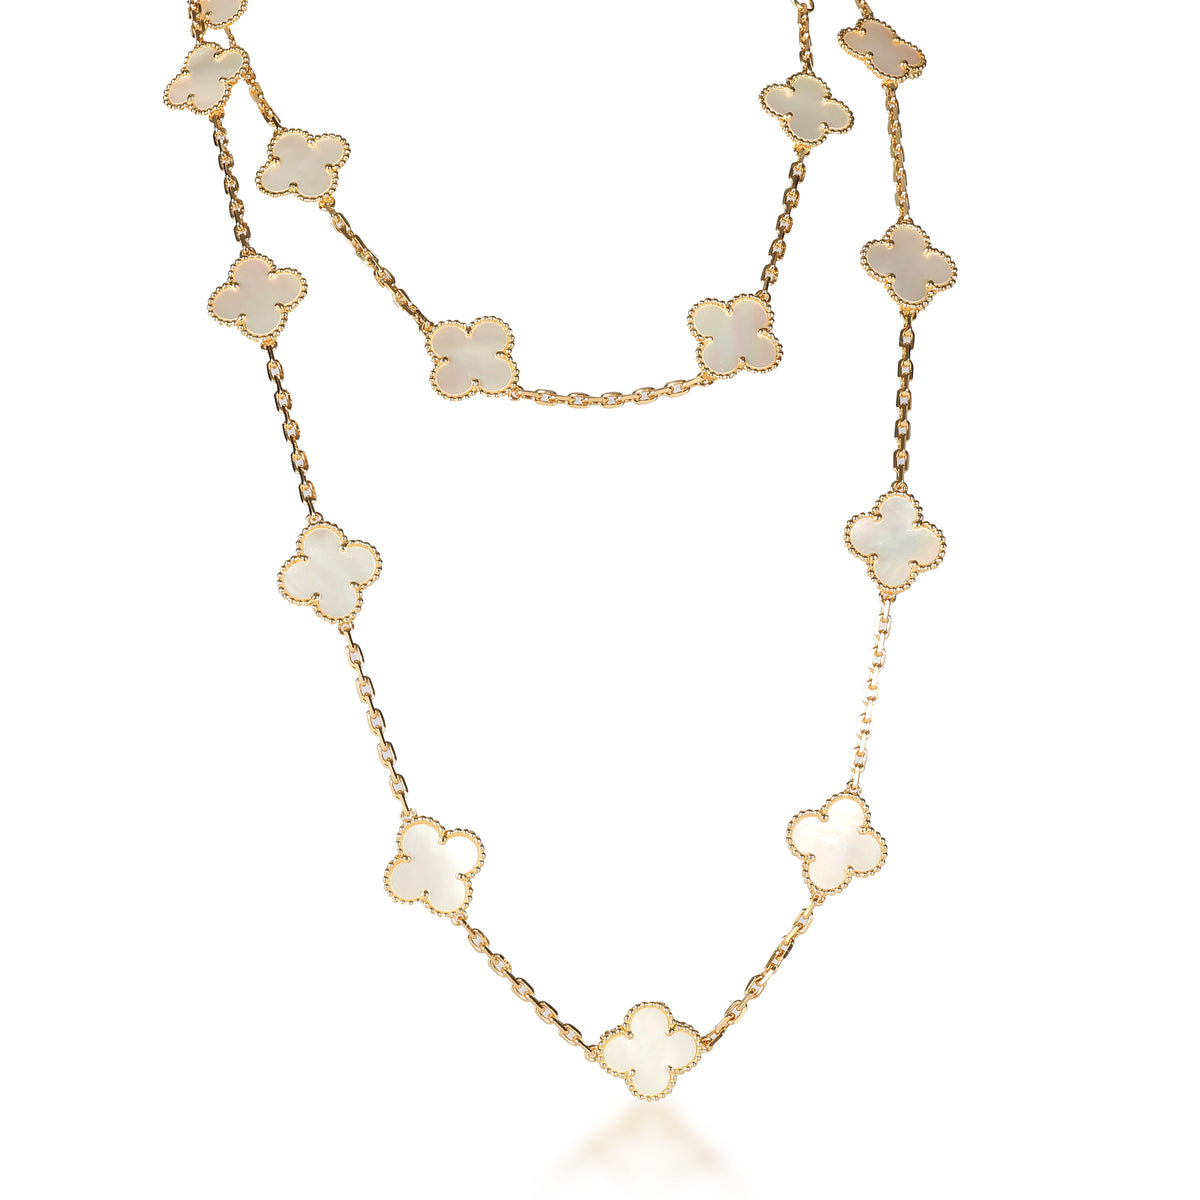 Van Cleef & Arpels Vintage Alhambra Mother Of Pearl Necklace in 18K Yellow Gold